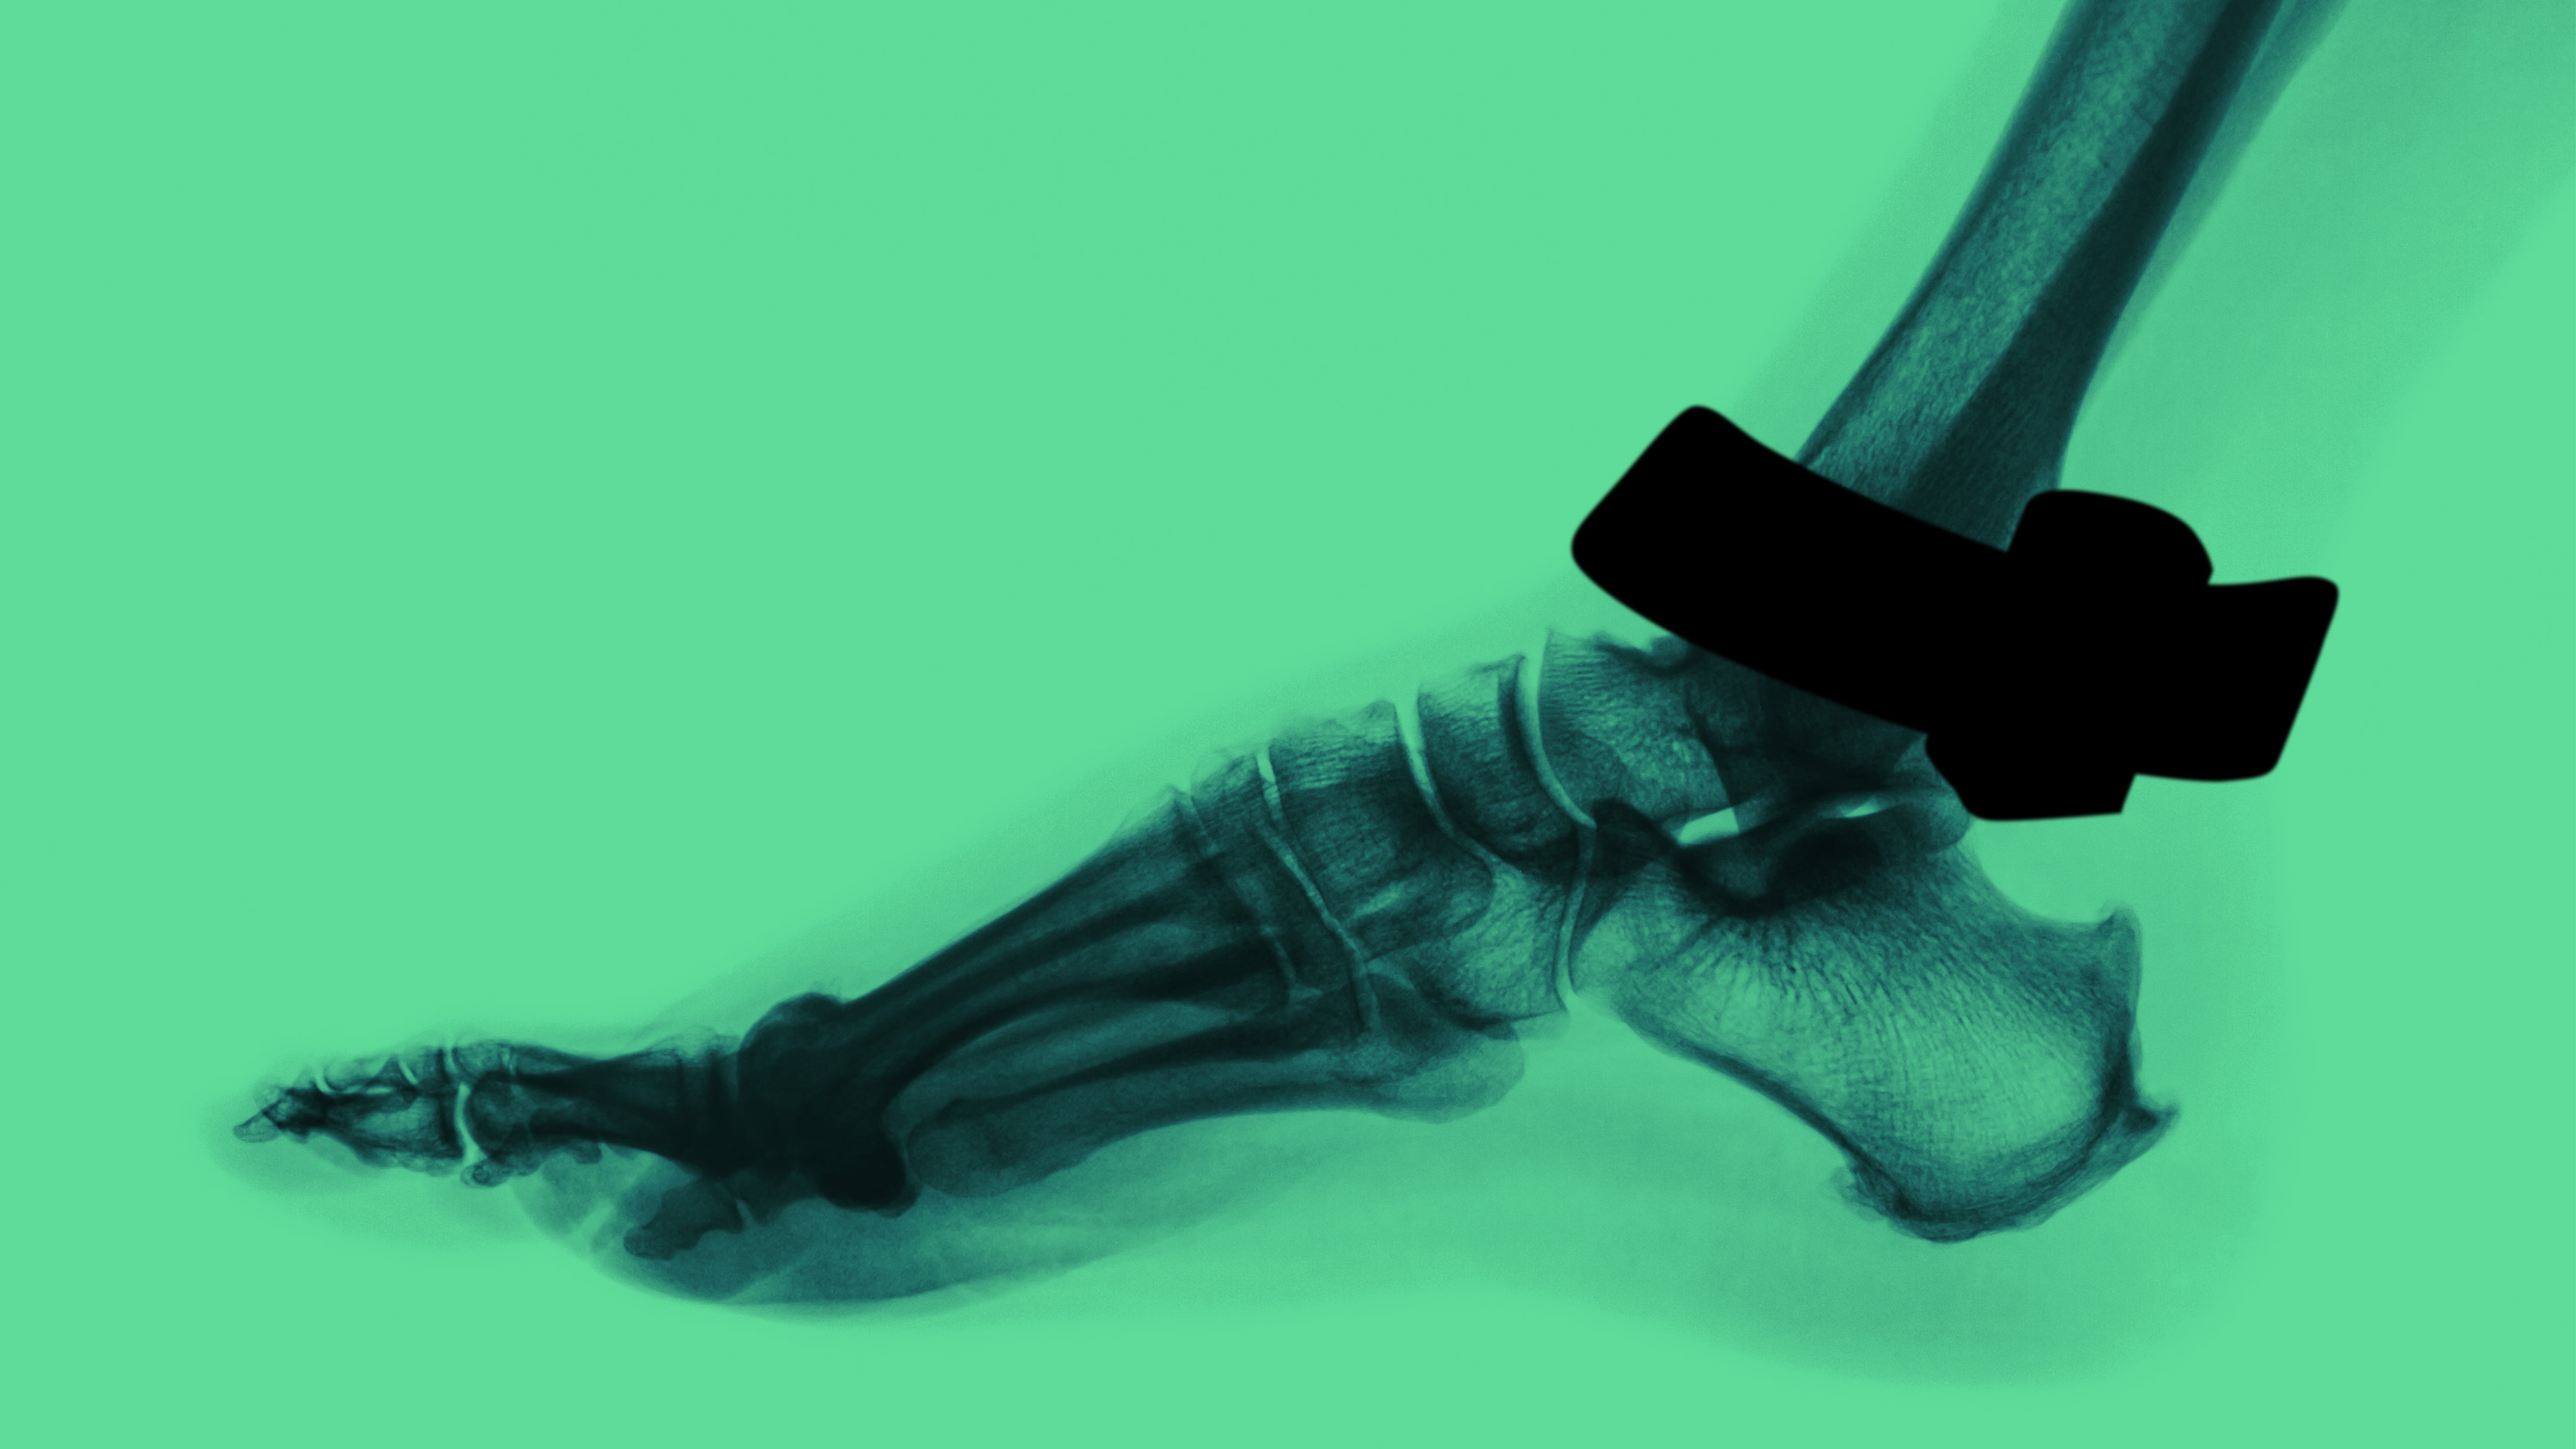 x-ray view of ankle with ankle monitor